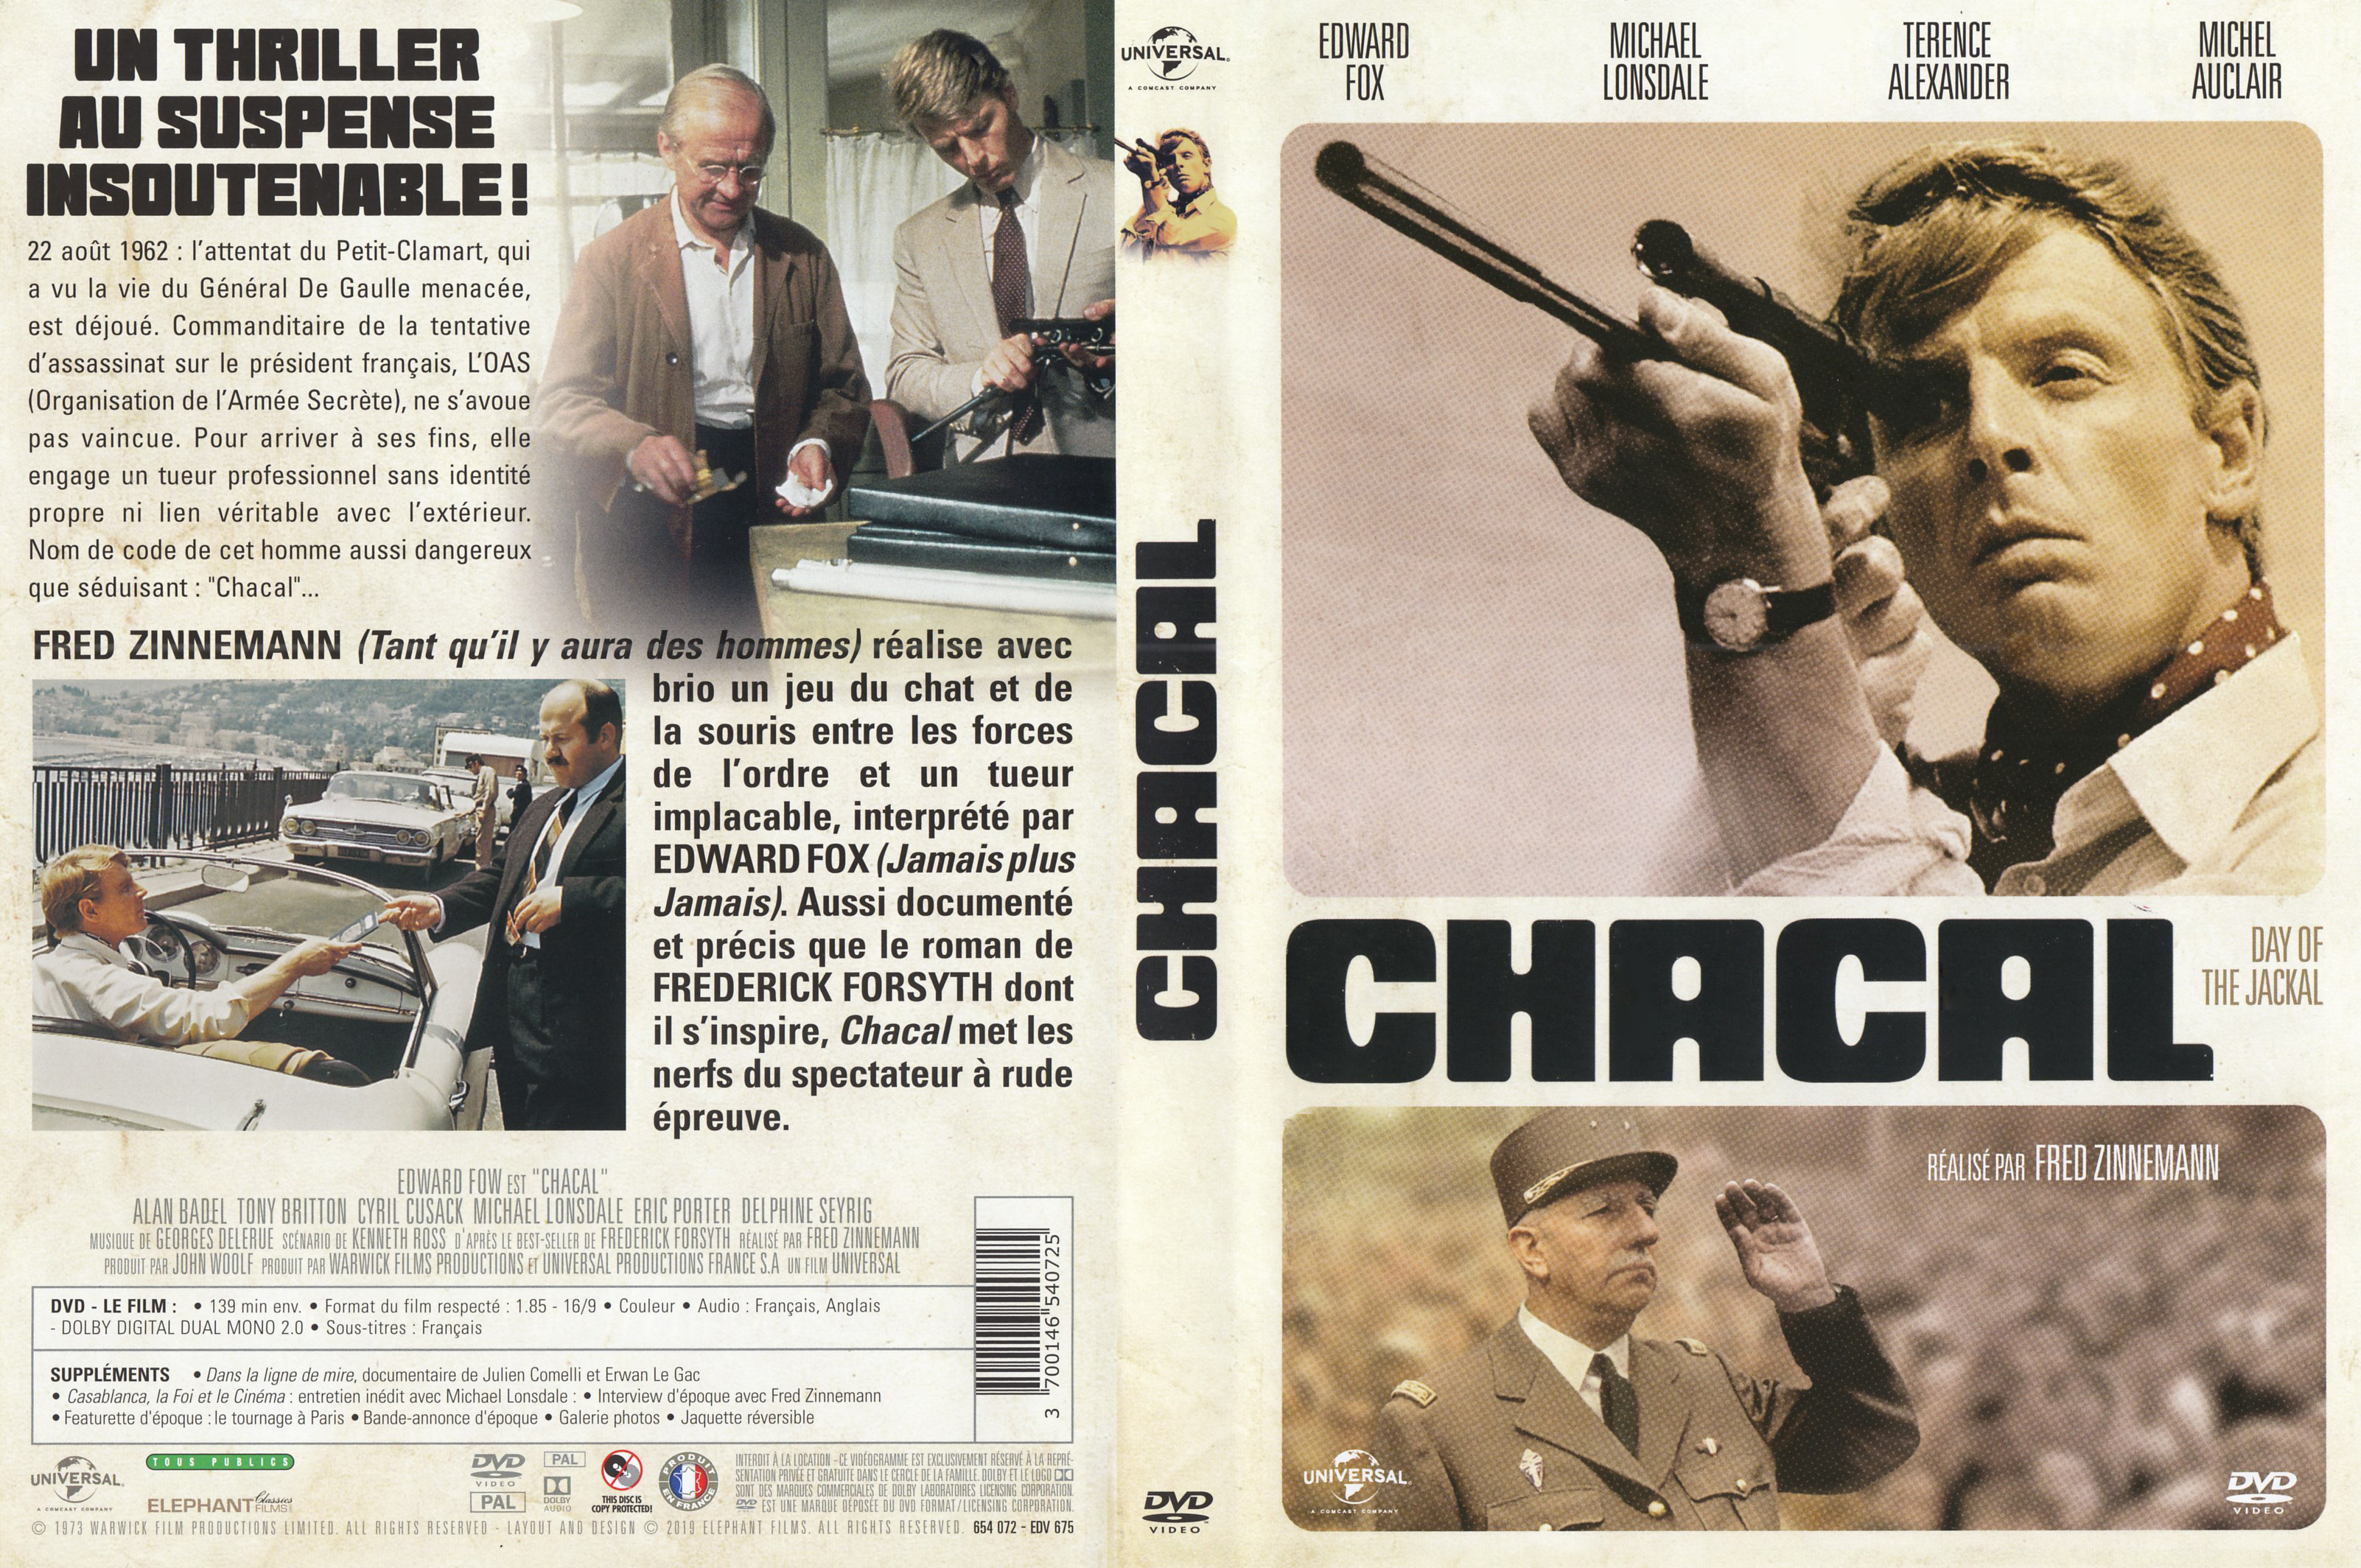 Jaquette DVD Chacal v2